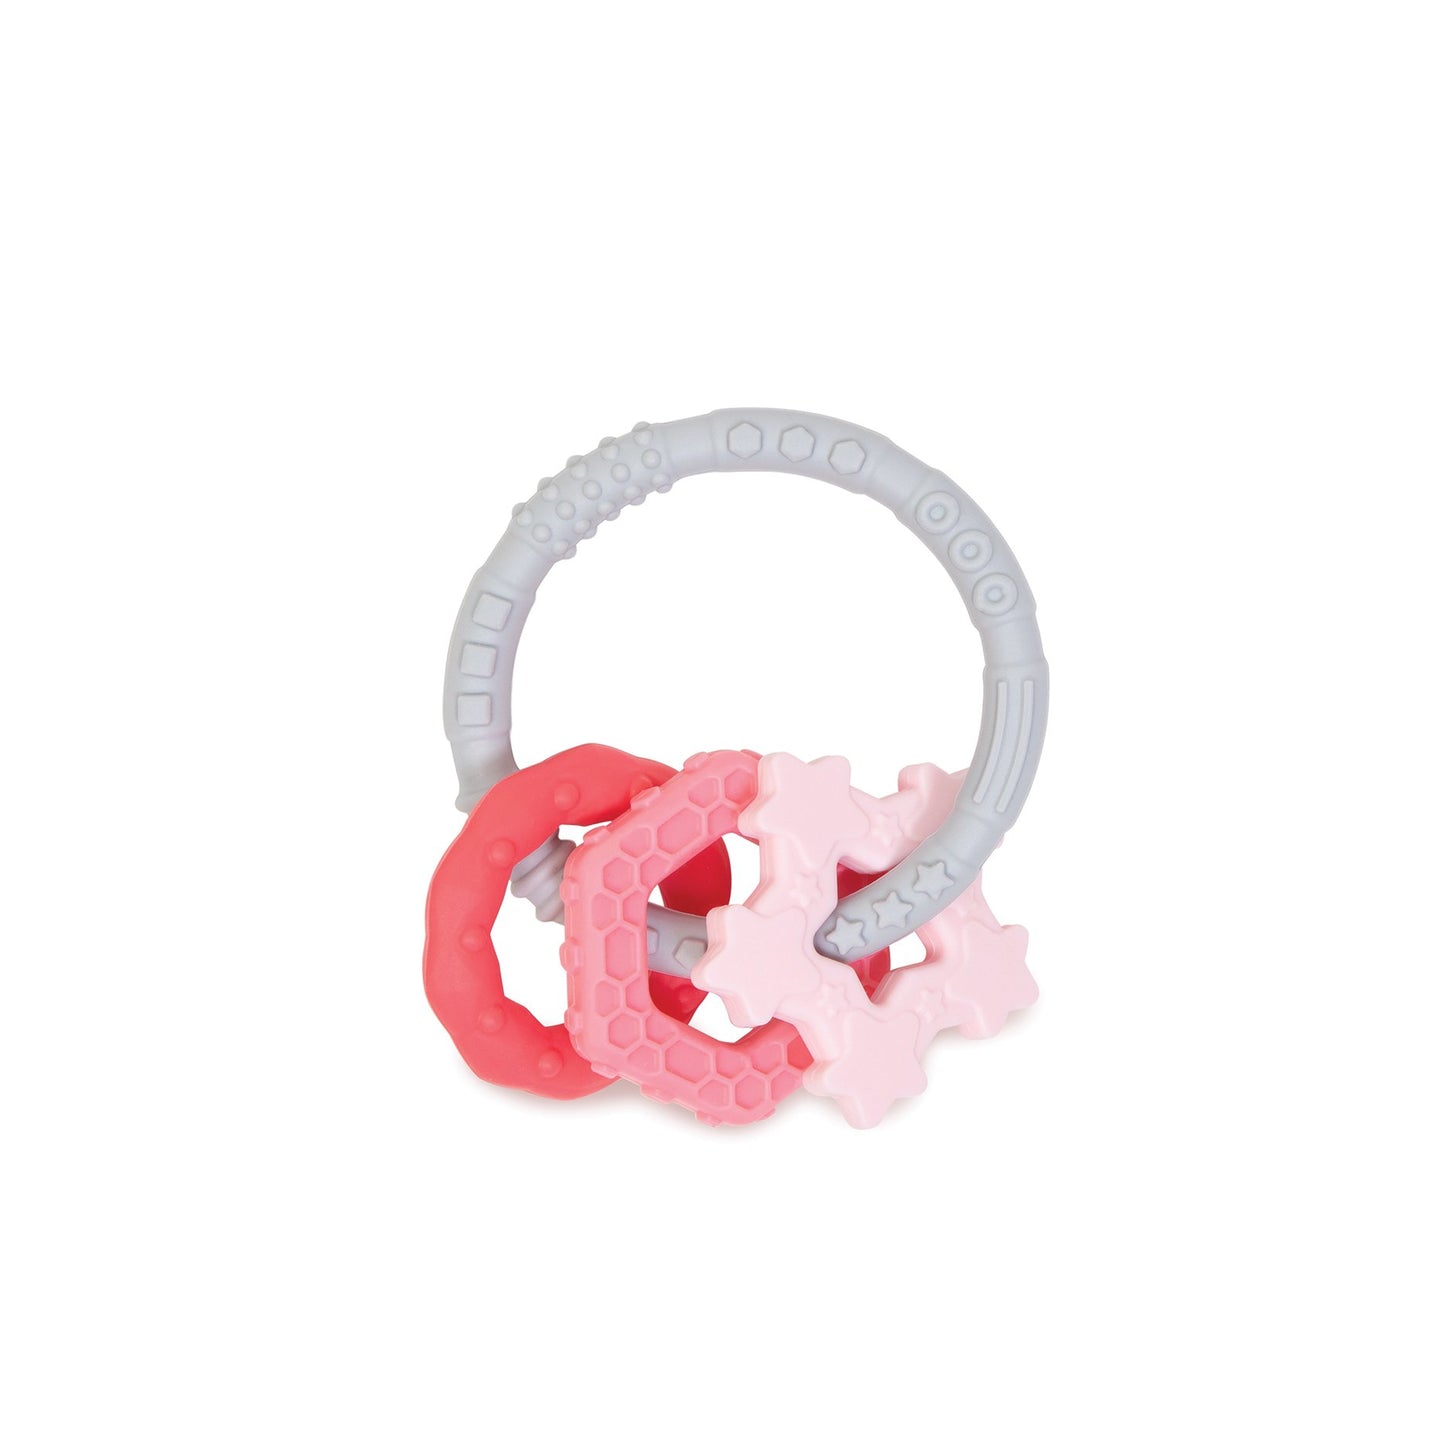 flexible grey teething circle with a dark pink circle mid pink hexagon and light pink star charms with different textures